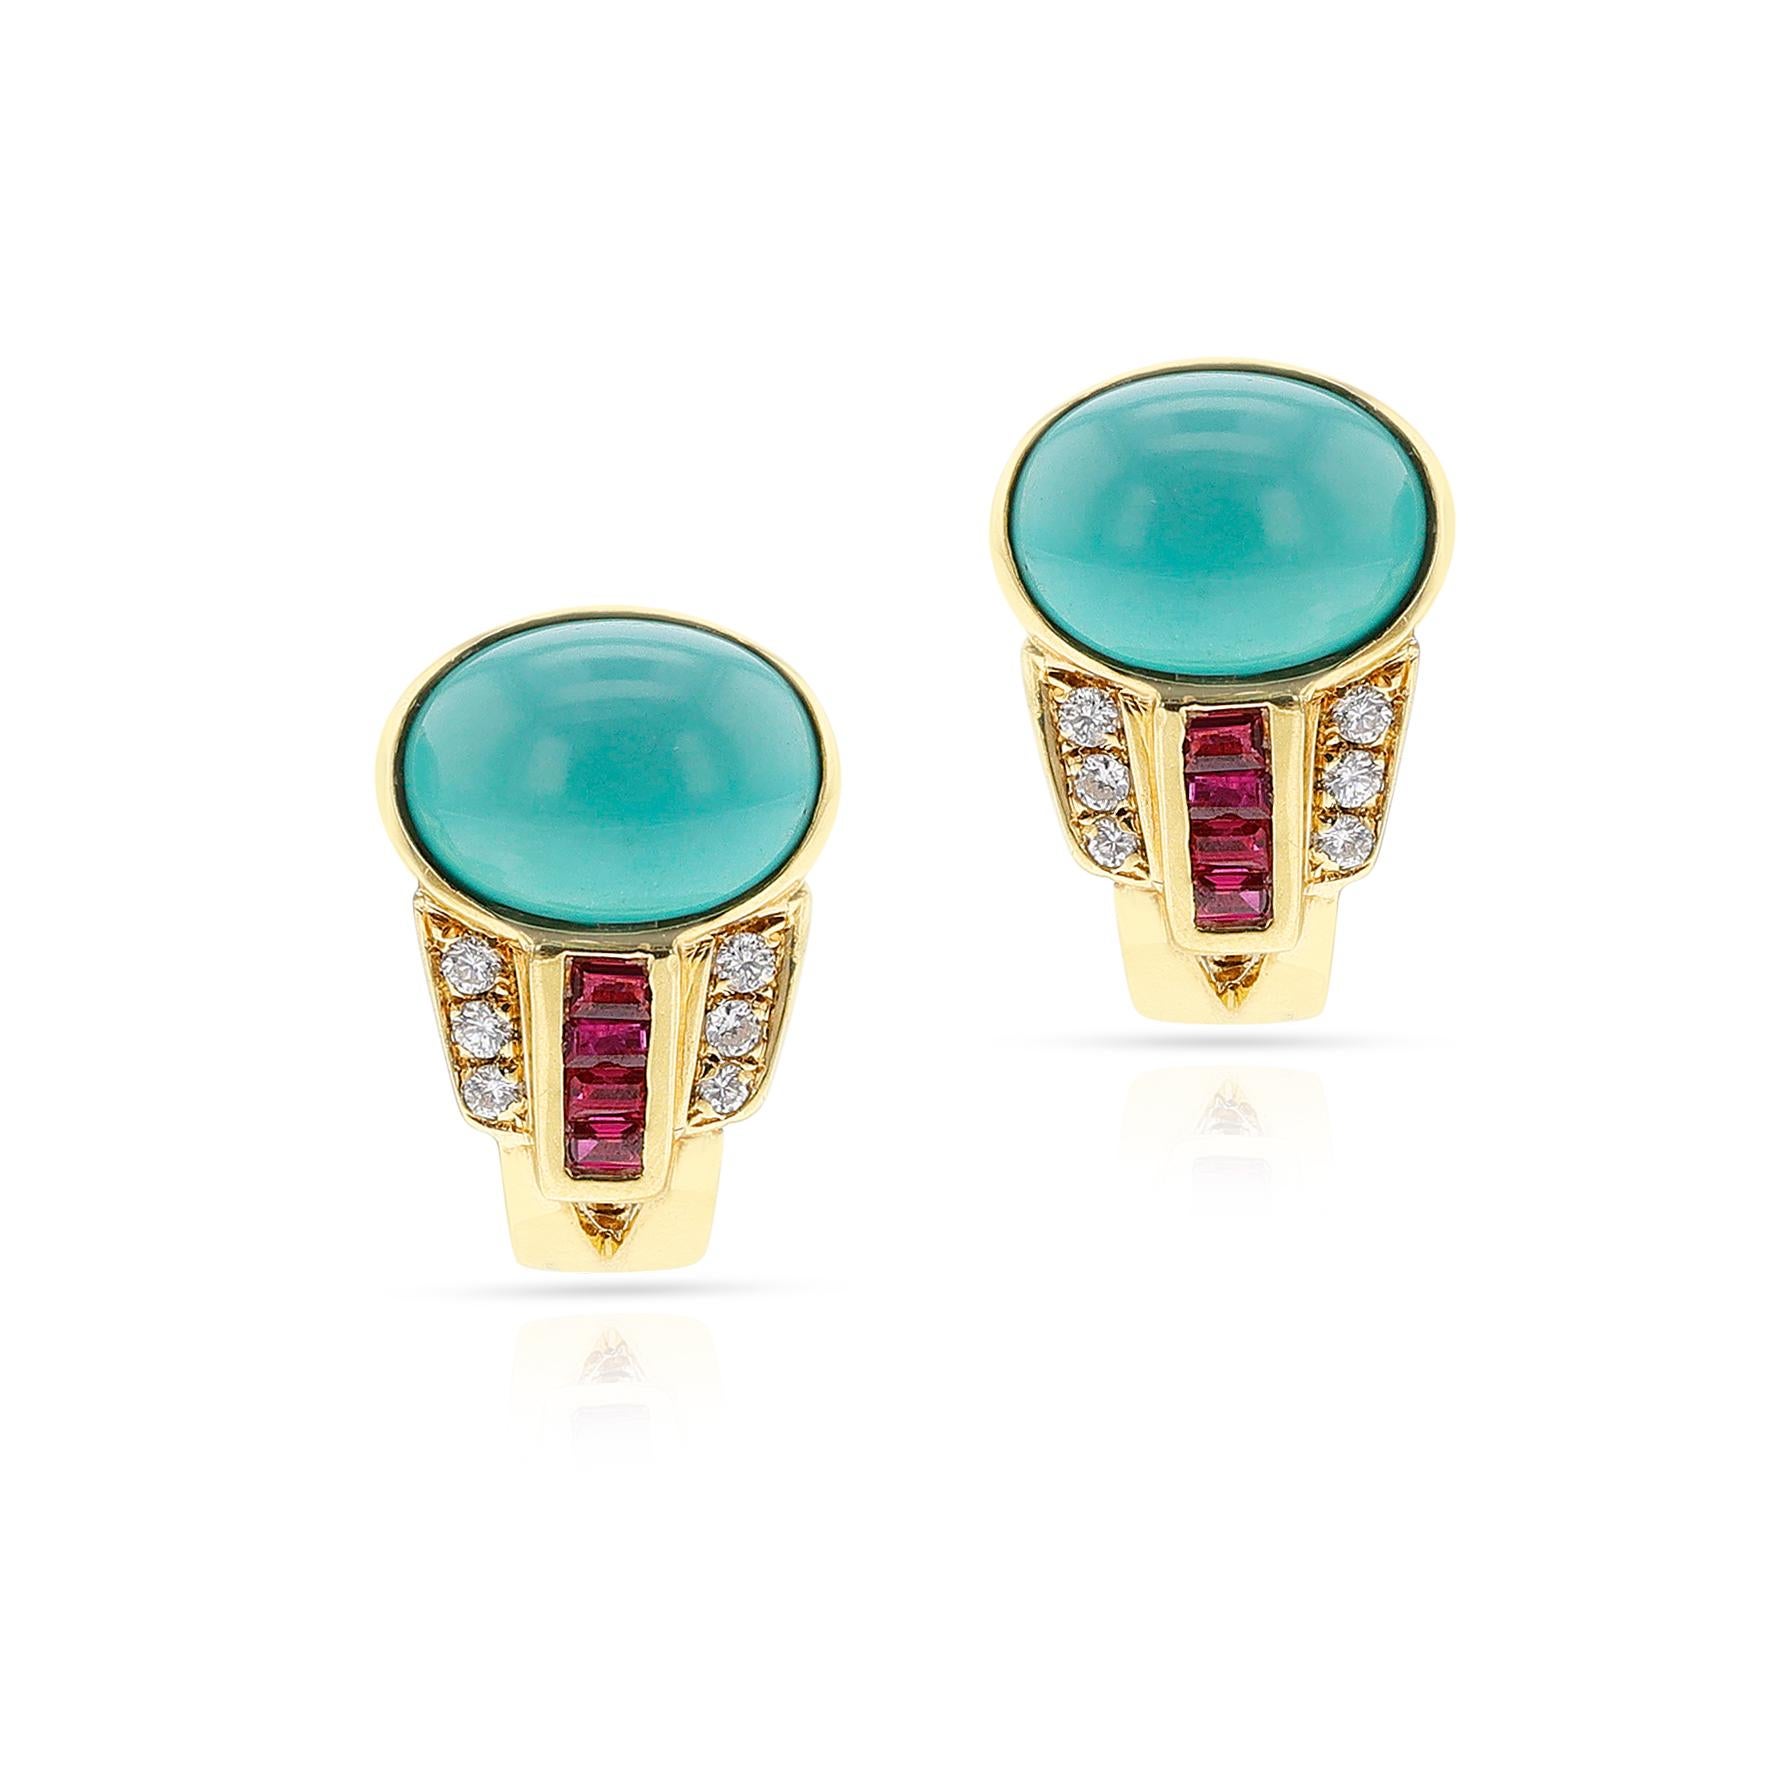 A pair of Oval Turquoise Cabochon, Ruby and Diamond Earrings made in 18k Gold. The diamonds weigh appx. 0.60 carats and are of G-H color, VS-SI clarity. The length is 1 inch.



SKU: 1499